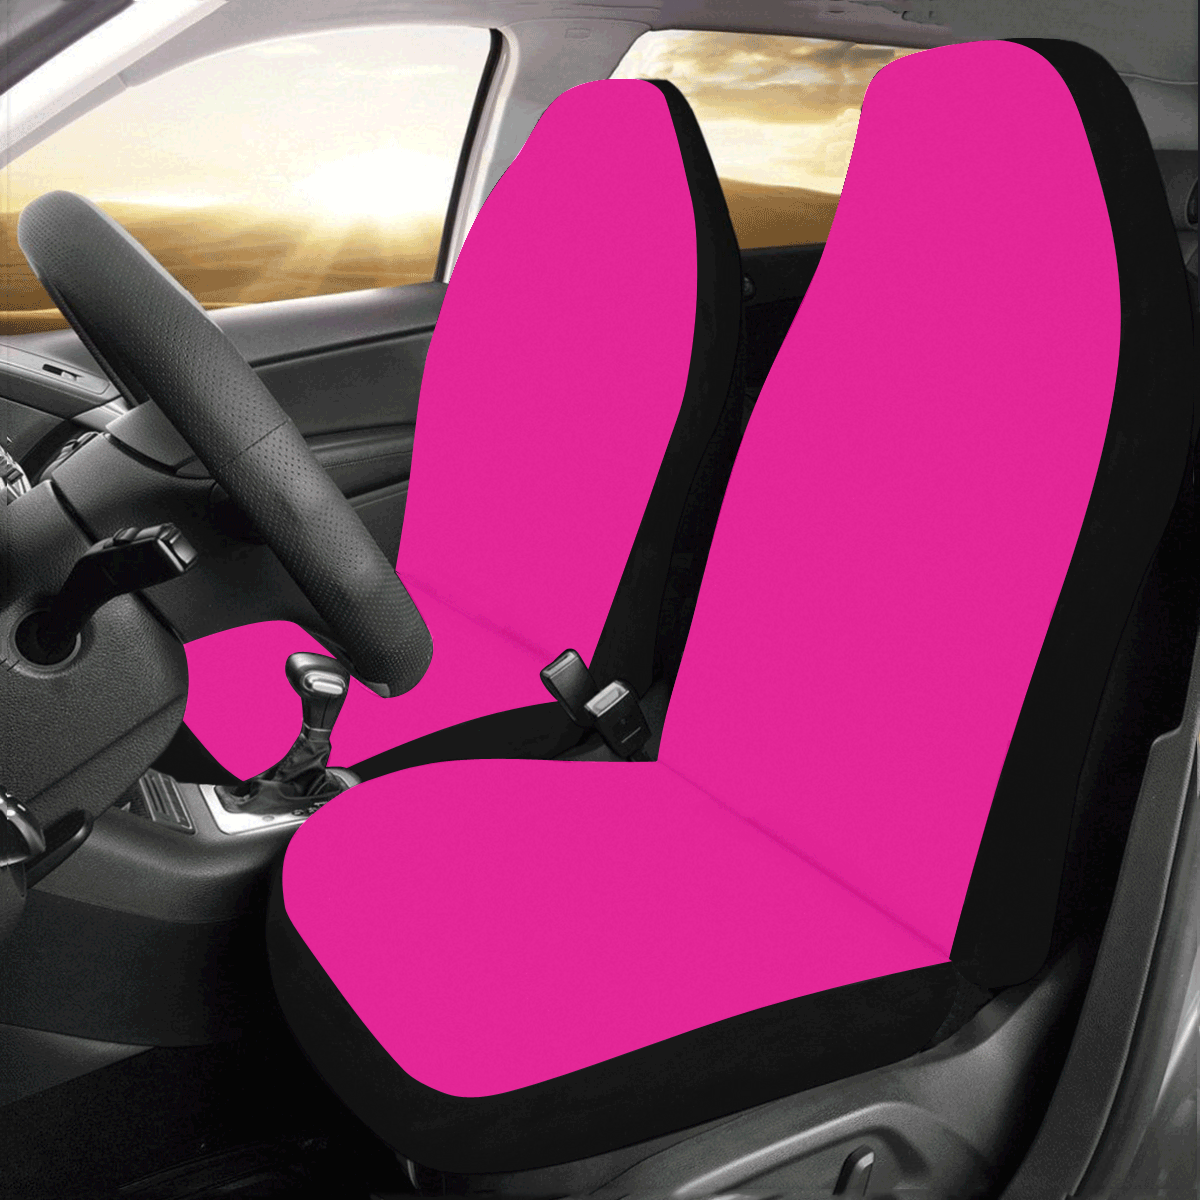 Hot Fuchsia Pink Solid Colored Car Seat Covers (Set of 2)